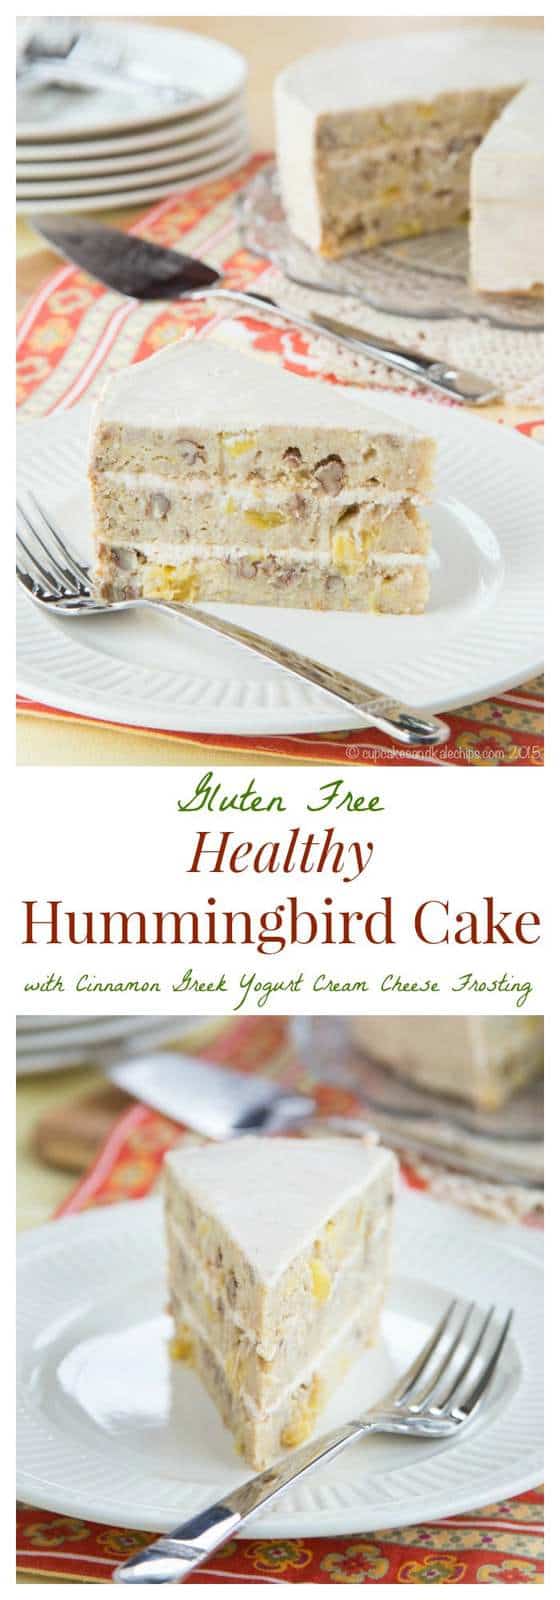 Gluten Free Healthy Hummingbird Cake with Greek Yogurt Cinnamon Cream Cheese Frosting - a moist fruit and nut filled cake sweetened with bananas and honey. Perfect for spring! | cupcakesandkalechips.com